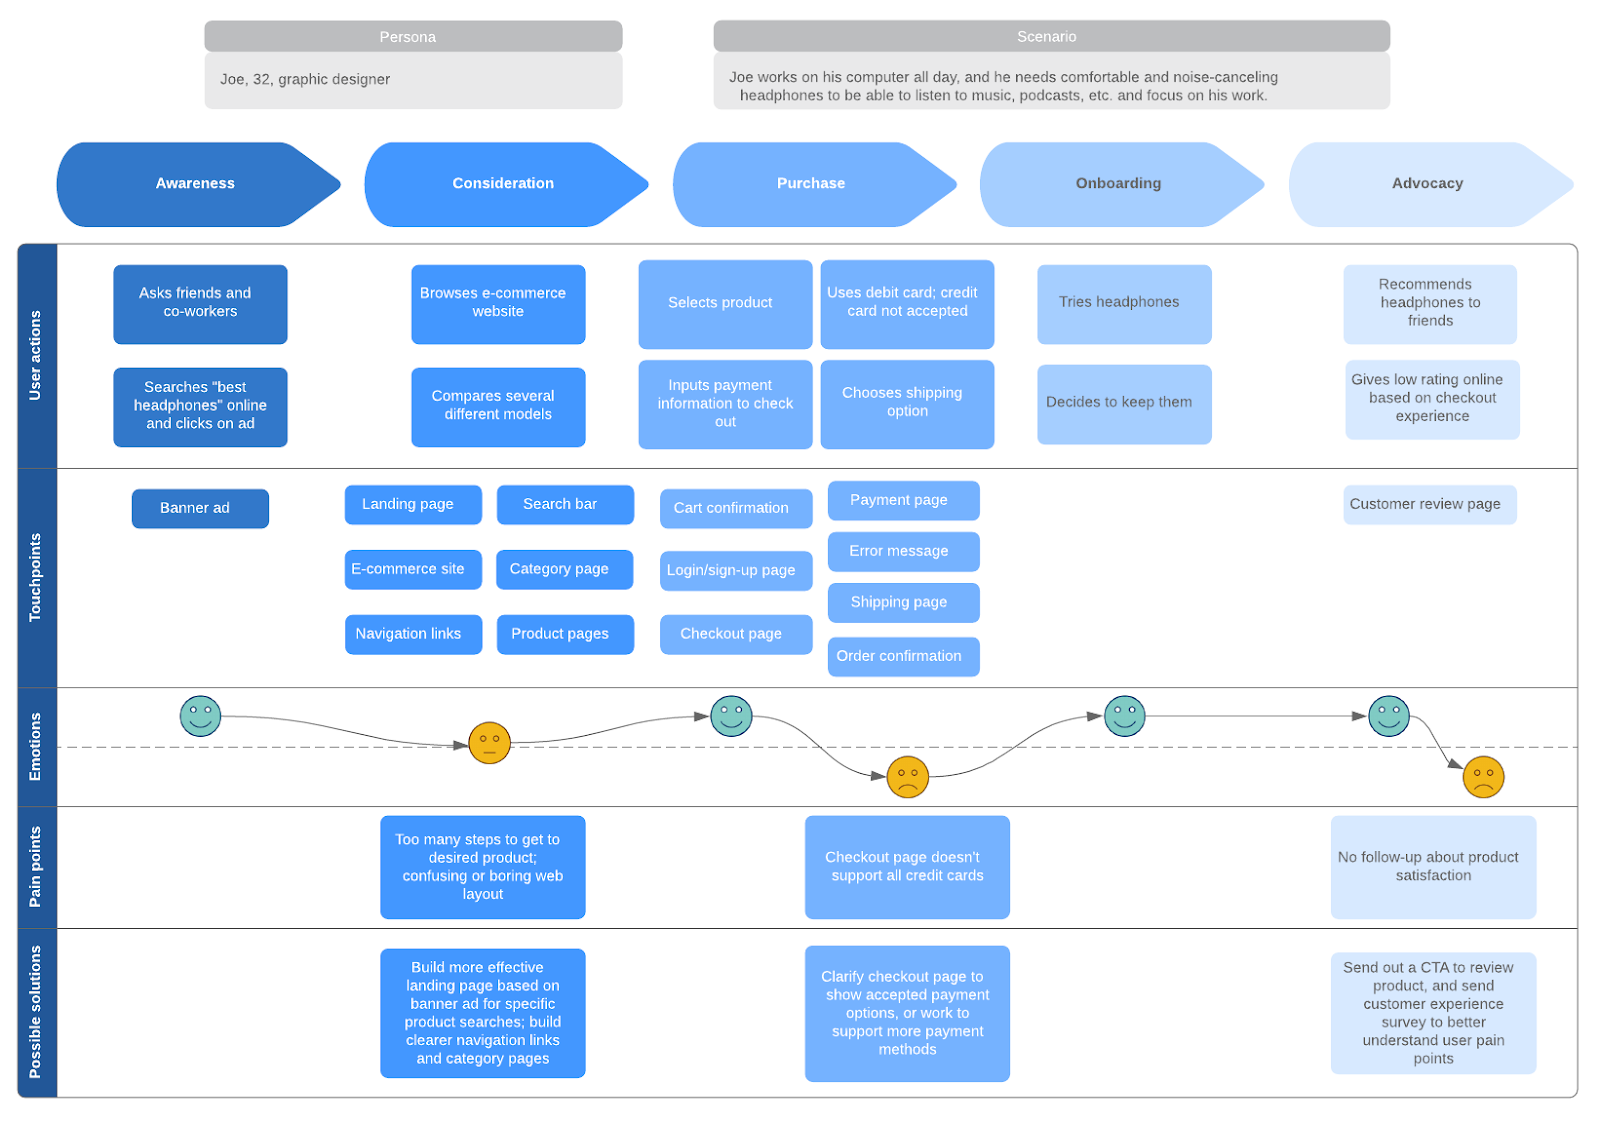 A sample customer journey map tracing a customer from awareness to advocacy